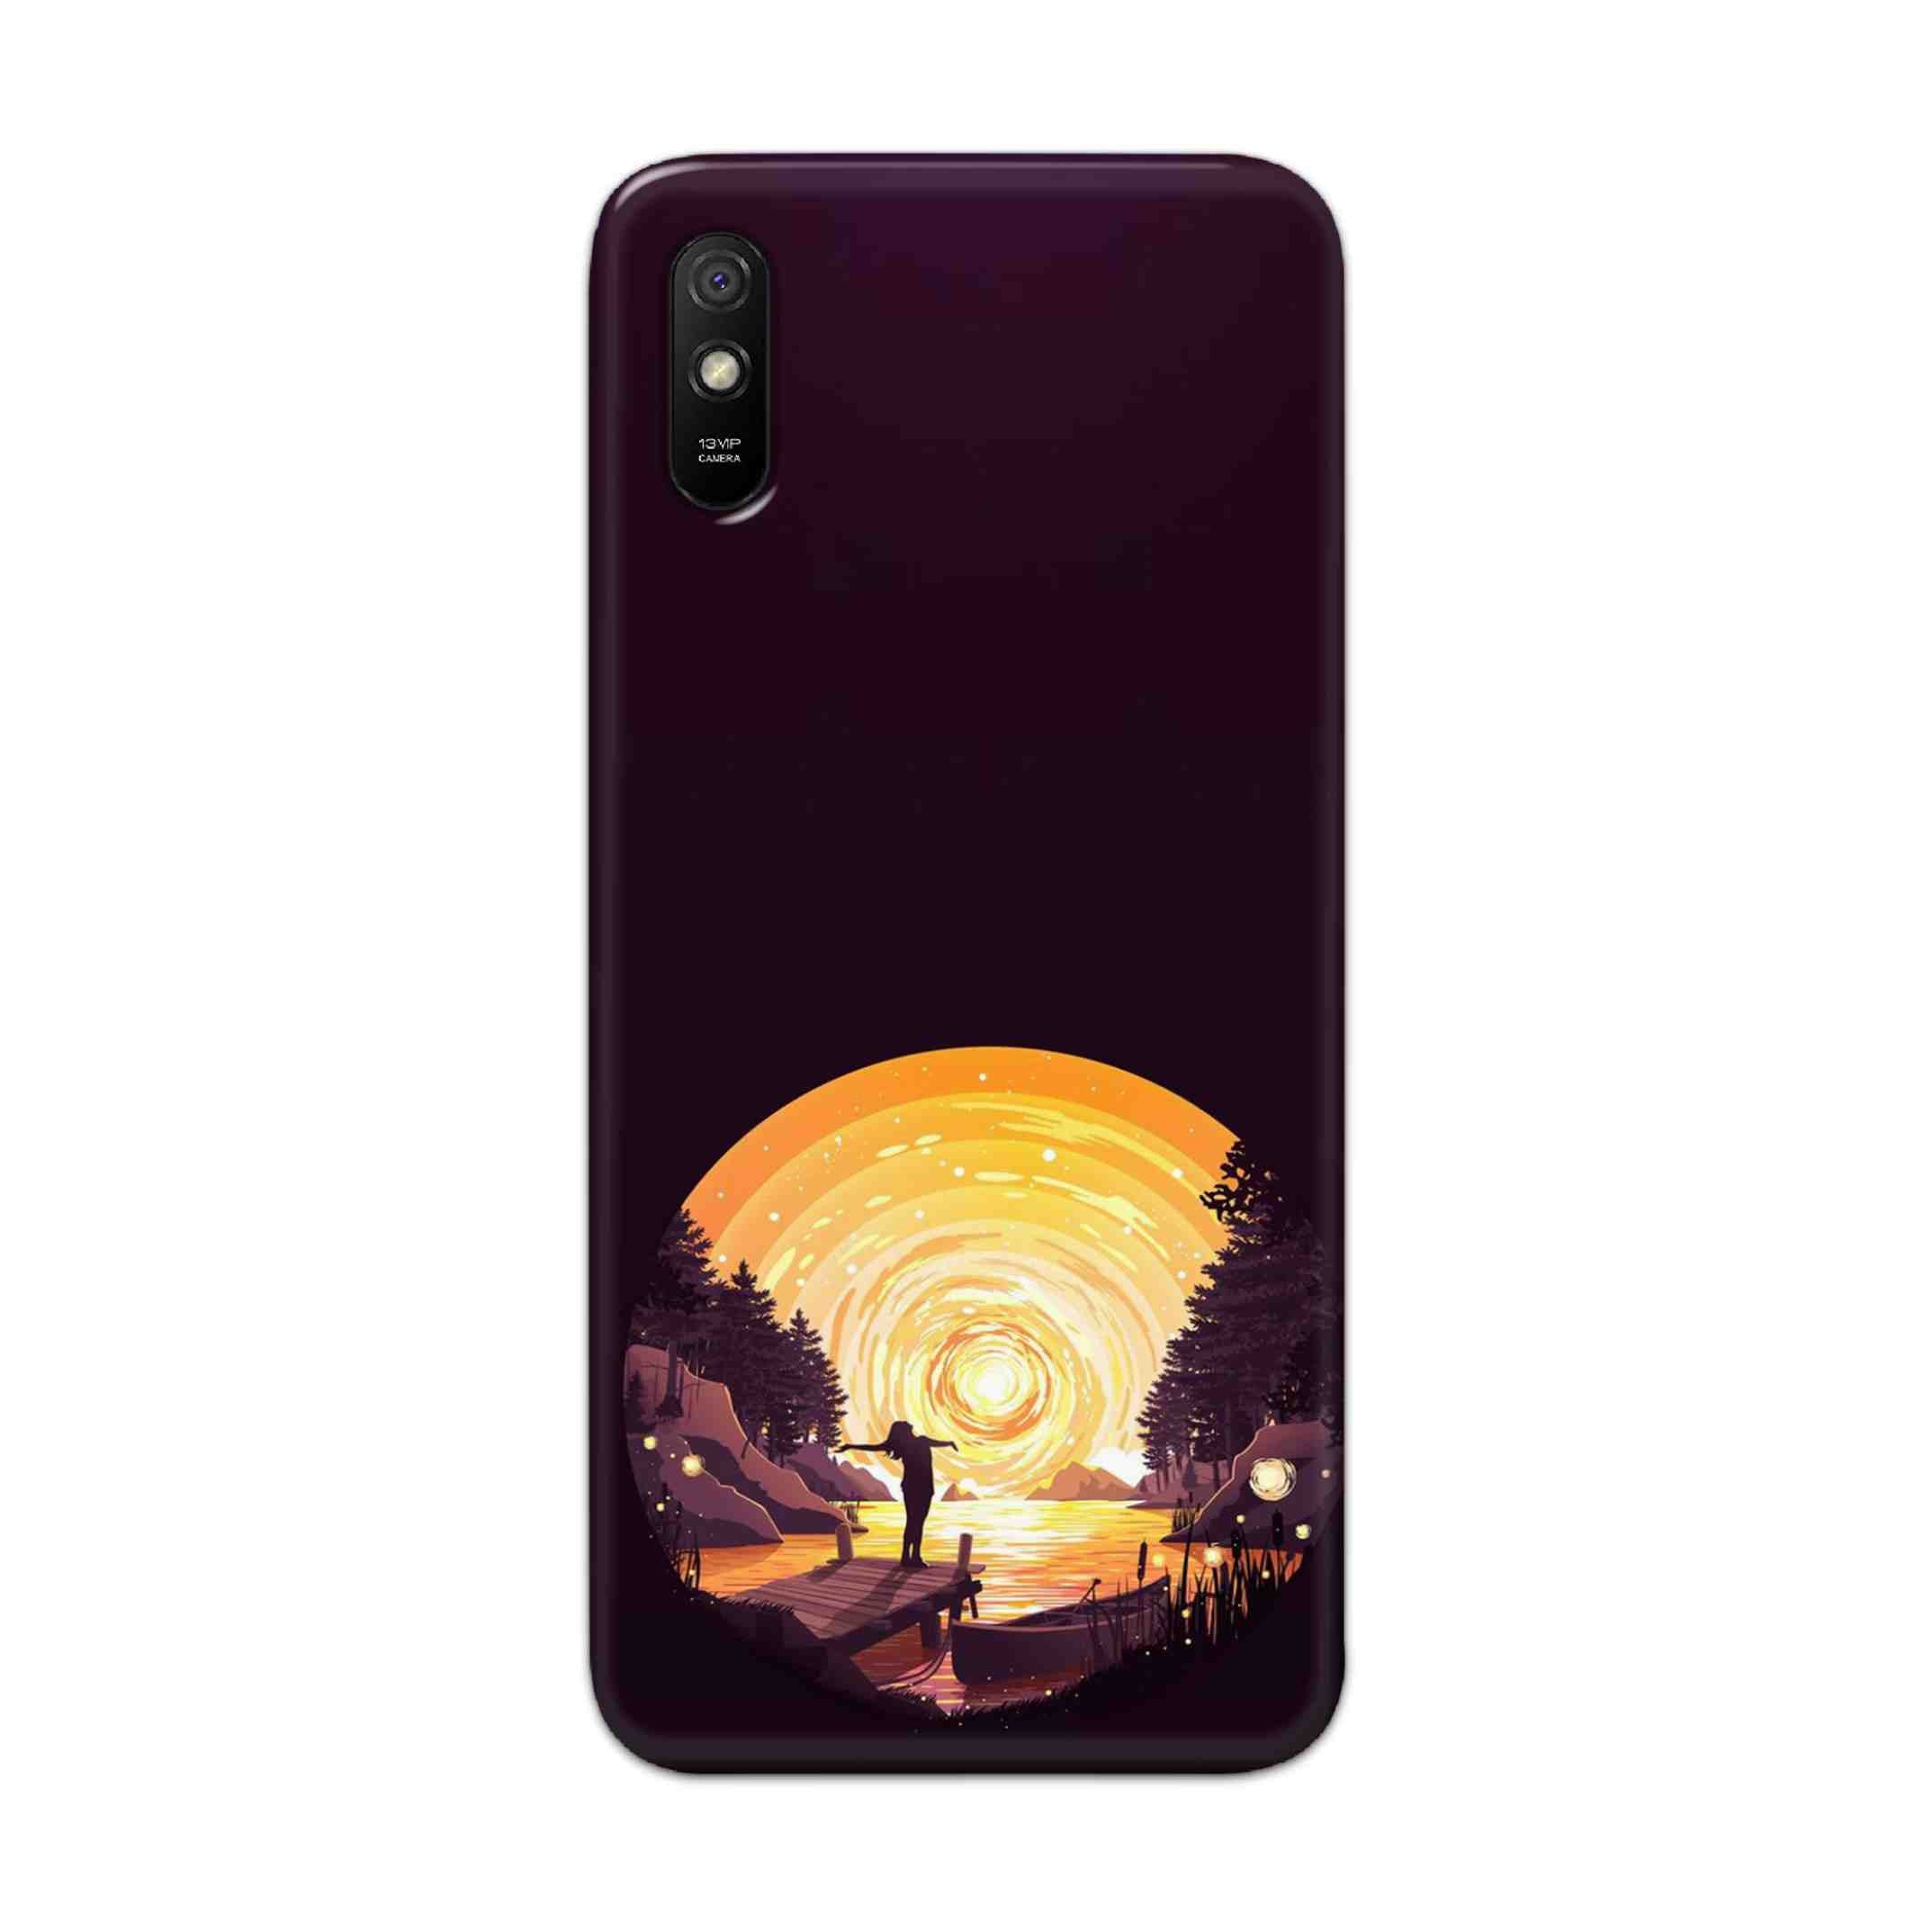 Buy Night Sunrise Hard Back Mobile Phone Case Cover For Redmi 9A Online